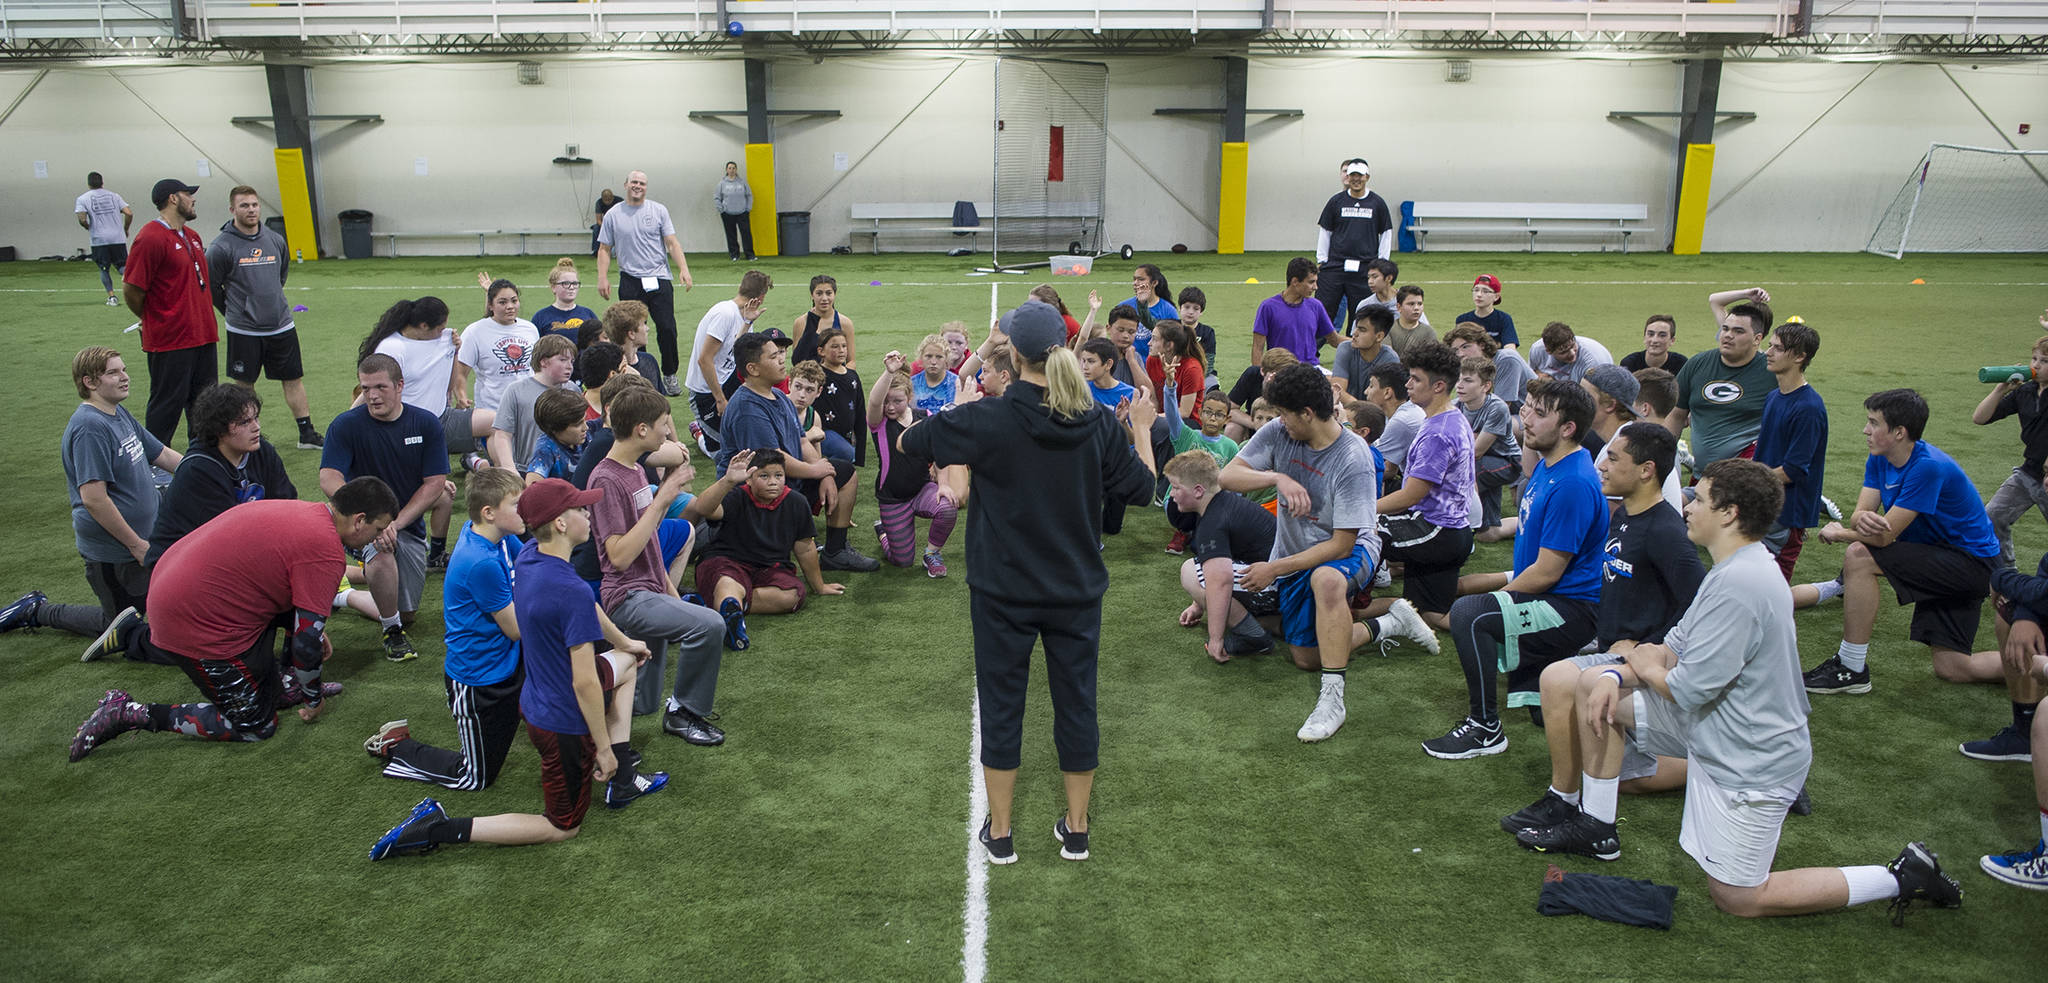 Cori Metzgar, Director of Sports Performance at Western Oregon University and host of the Juneau Football and Sports Performance Camp, speaks to athletes at the Dimond Park Field House last July. (Michael Penn | Juneau Empire File)